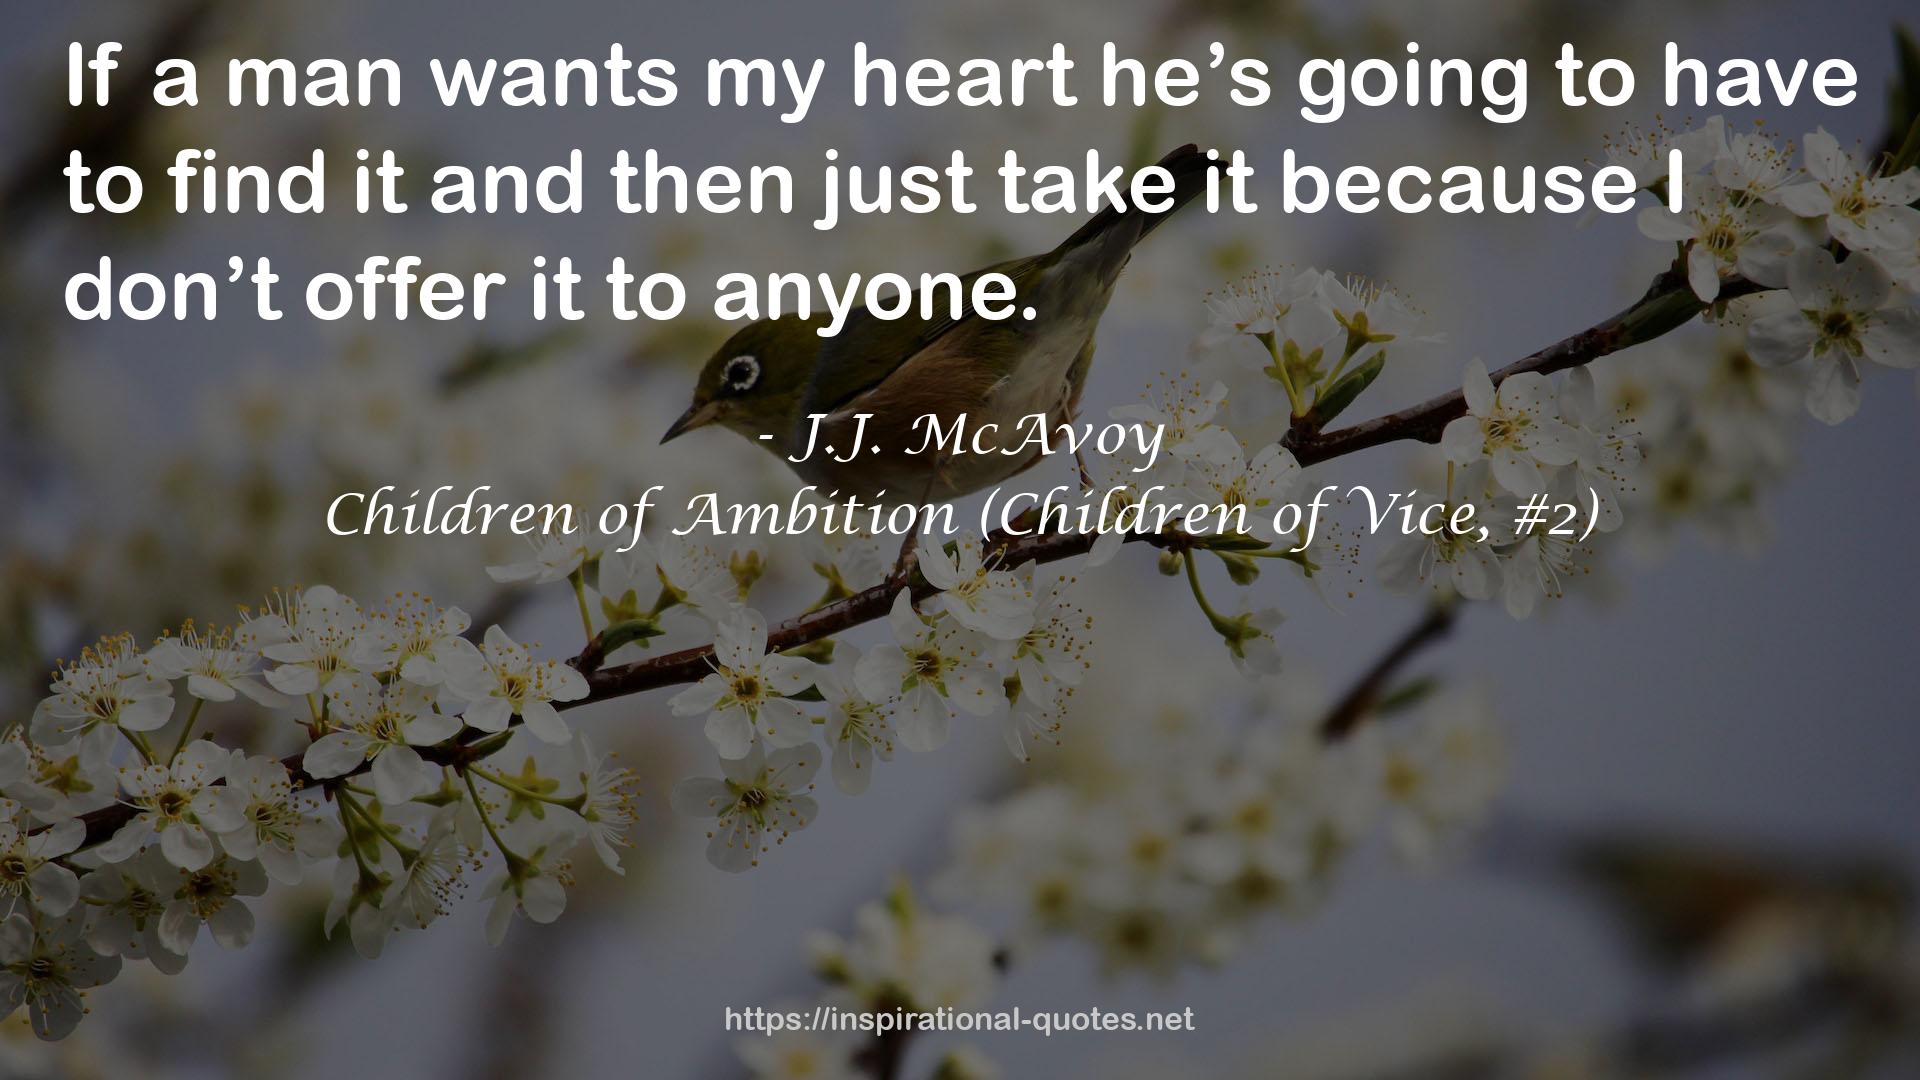 Children of Ambition (Children of Vice, #2) QUOTES